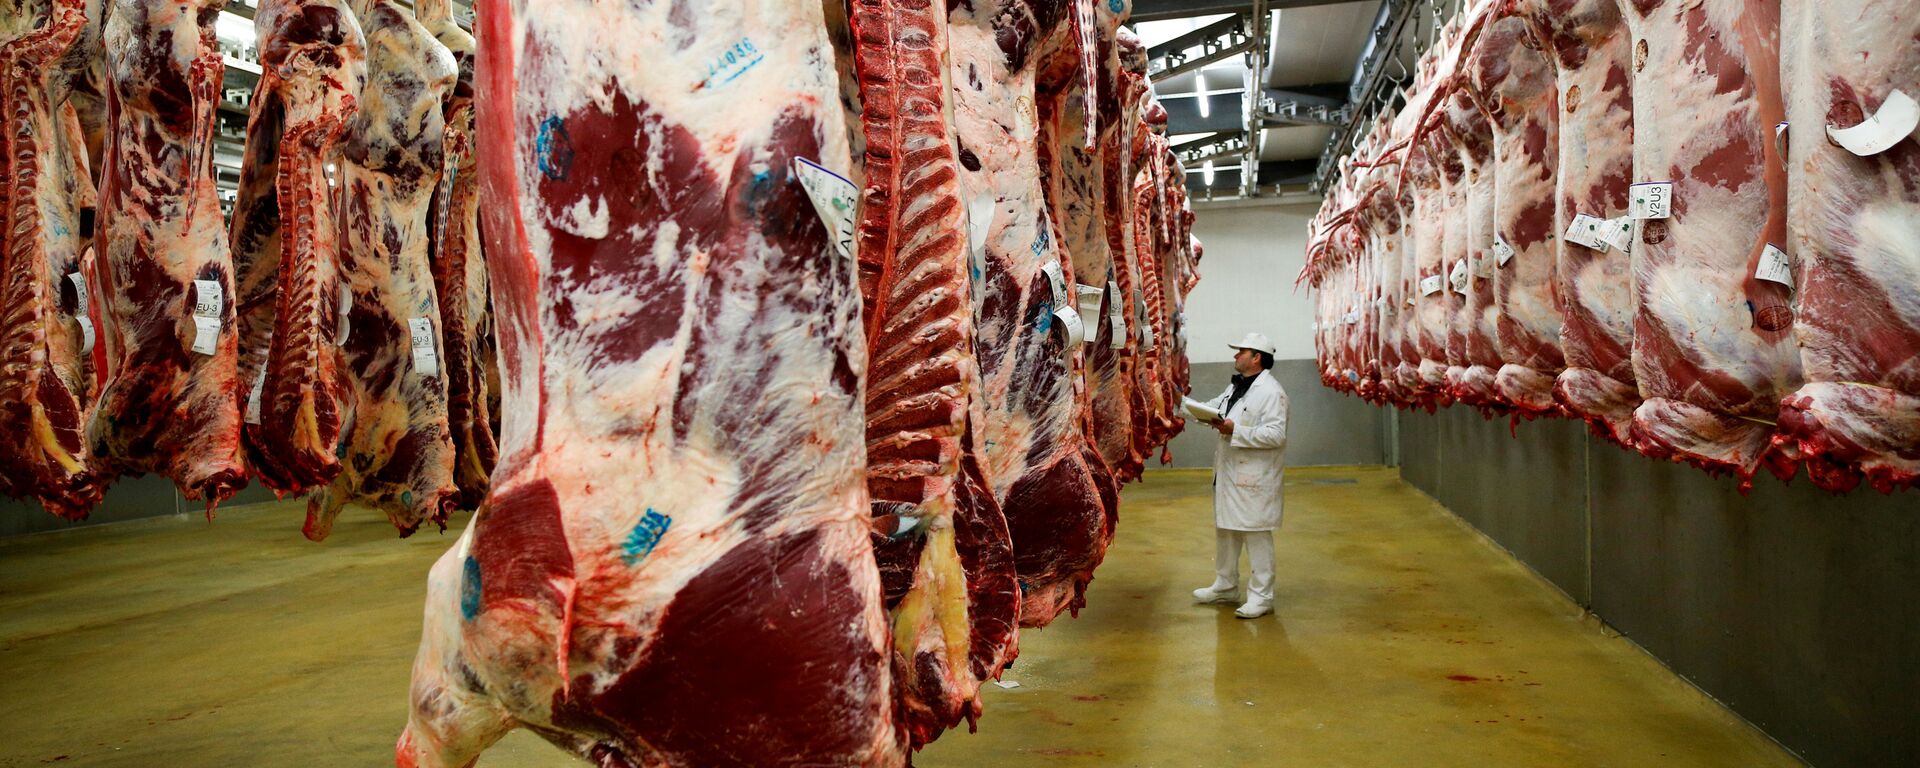 A wholesaler inspects beef carcasses that hang inside a refrigerated room at the Cibevial slaughterhouse in Corbas - 俄羅斯衛星通訊社, 1920, 04.06.2019